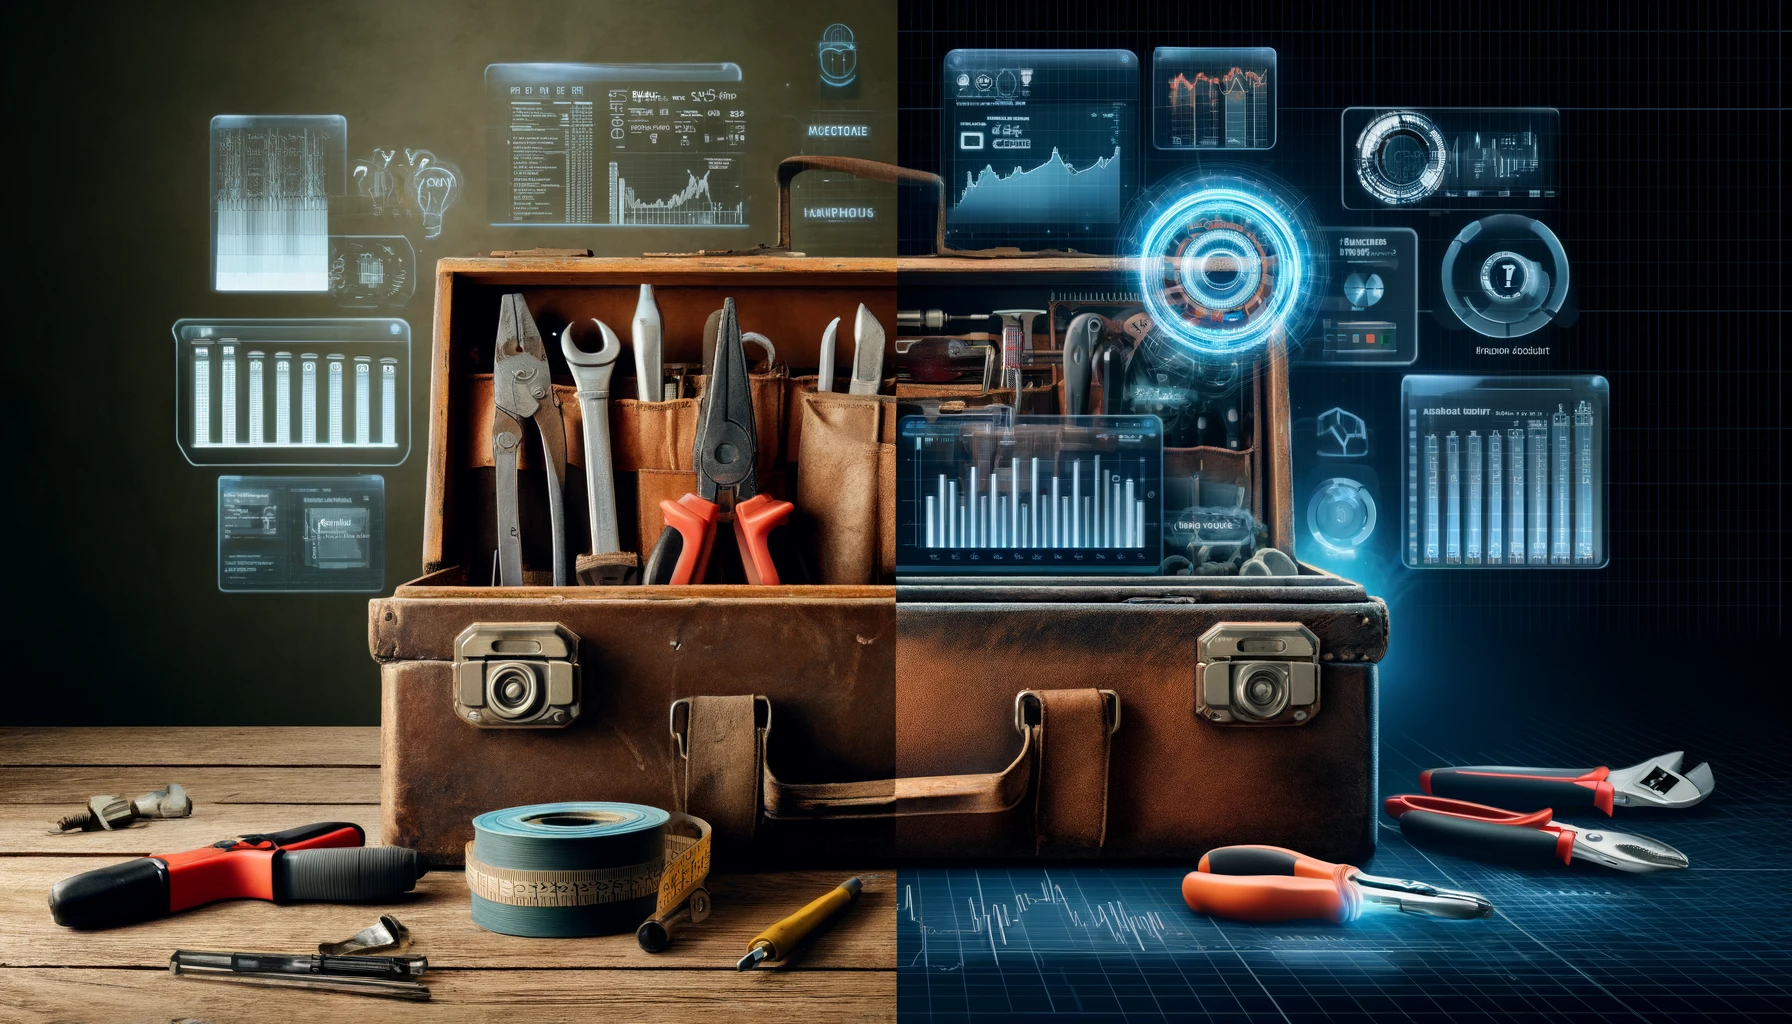 A classic electrician's toolbox with tools on the left, and a futuristic digital interface displaying analytics and a stylized light bulb icon on the right.